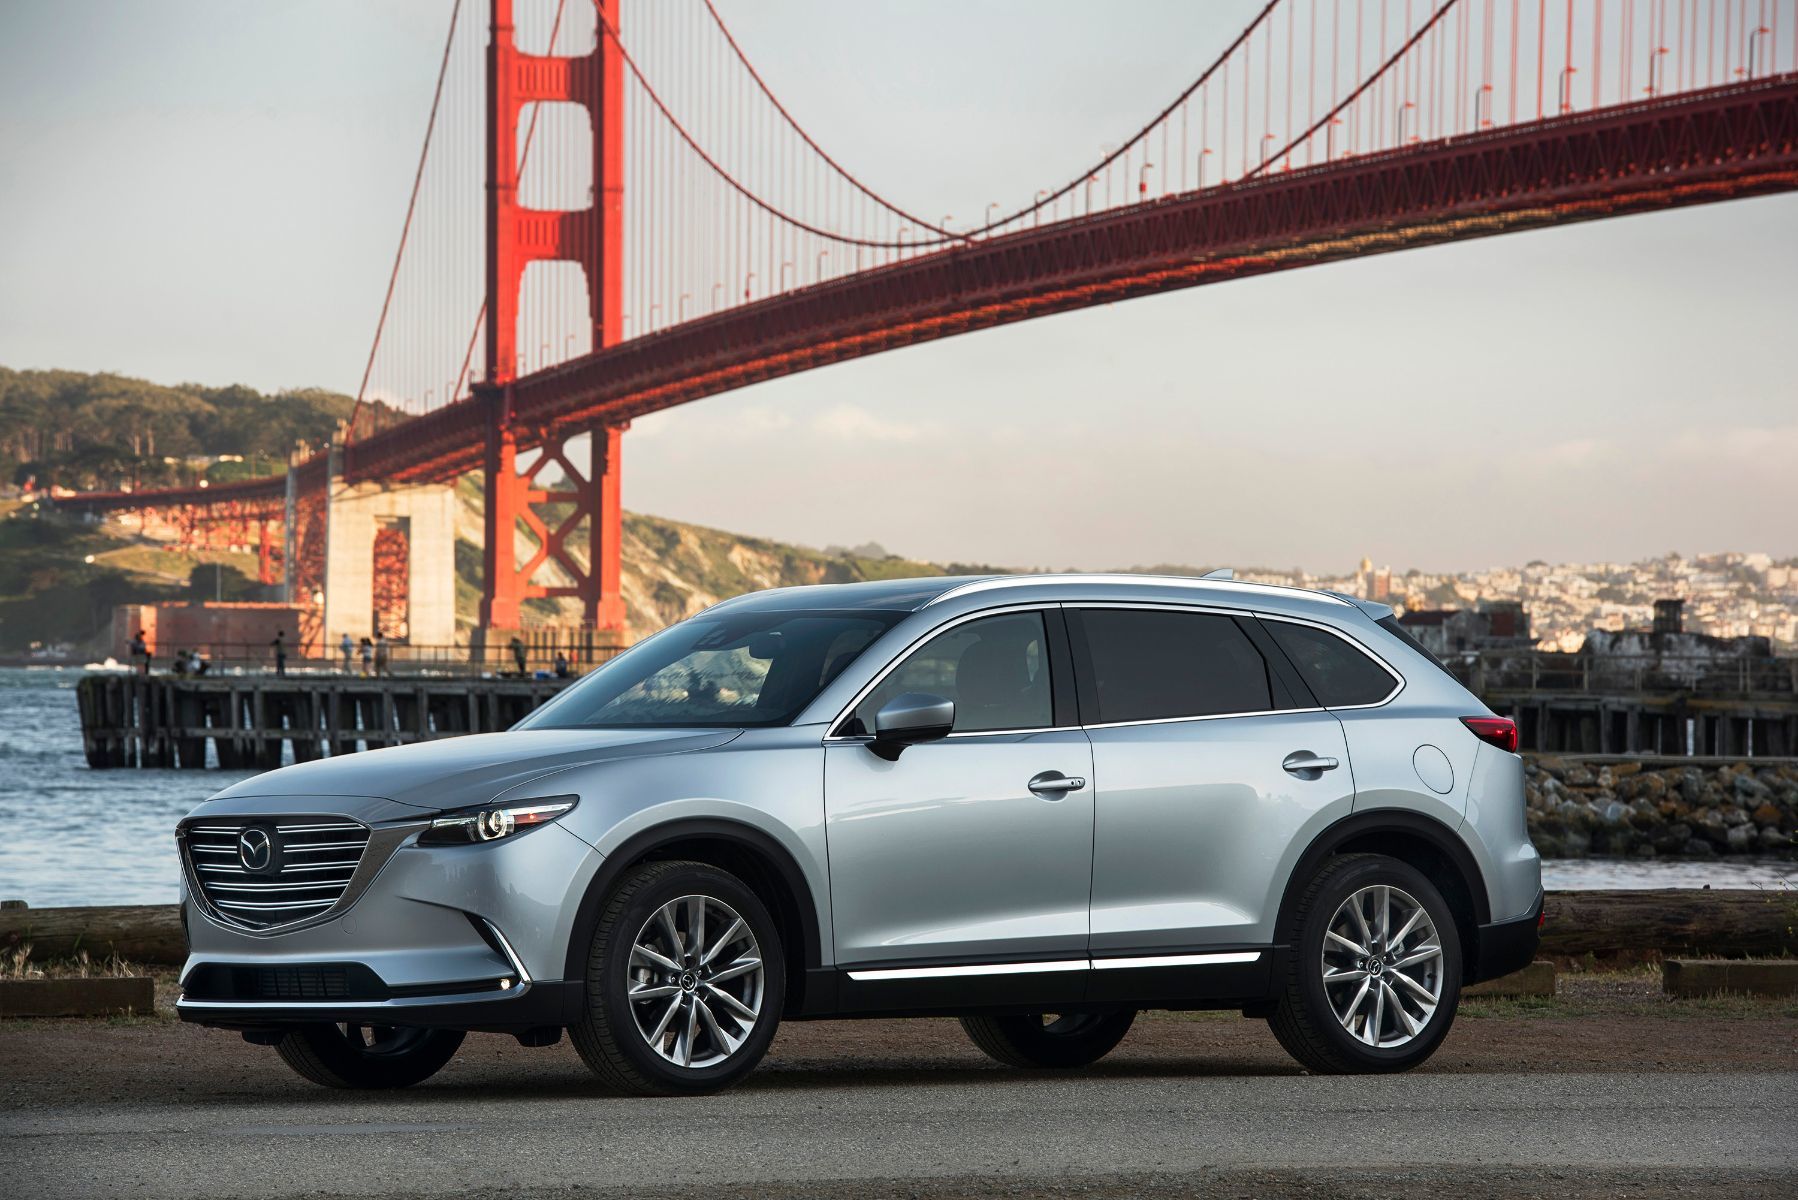 The 2019 Mazda CX-9 Gets Even Better